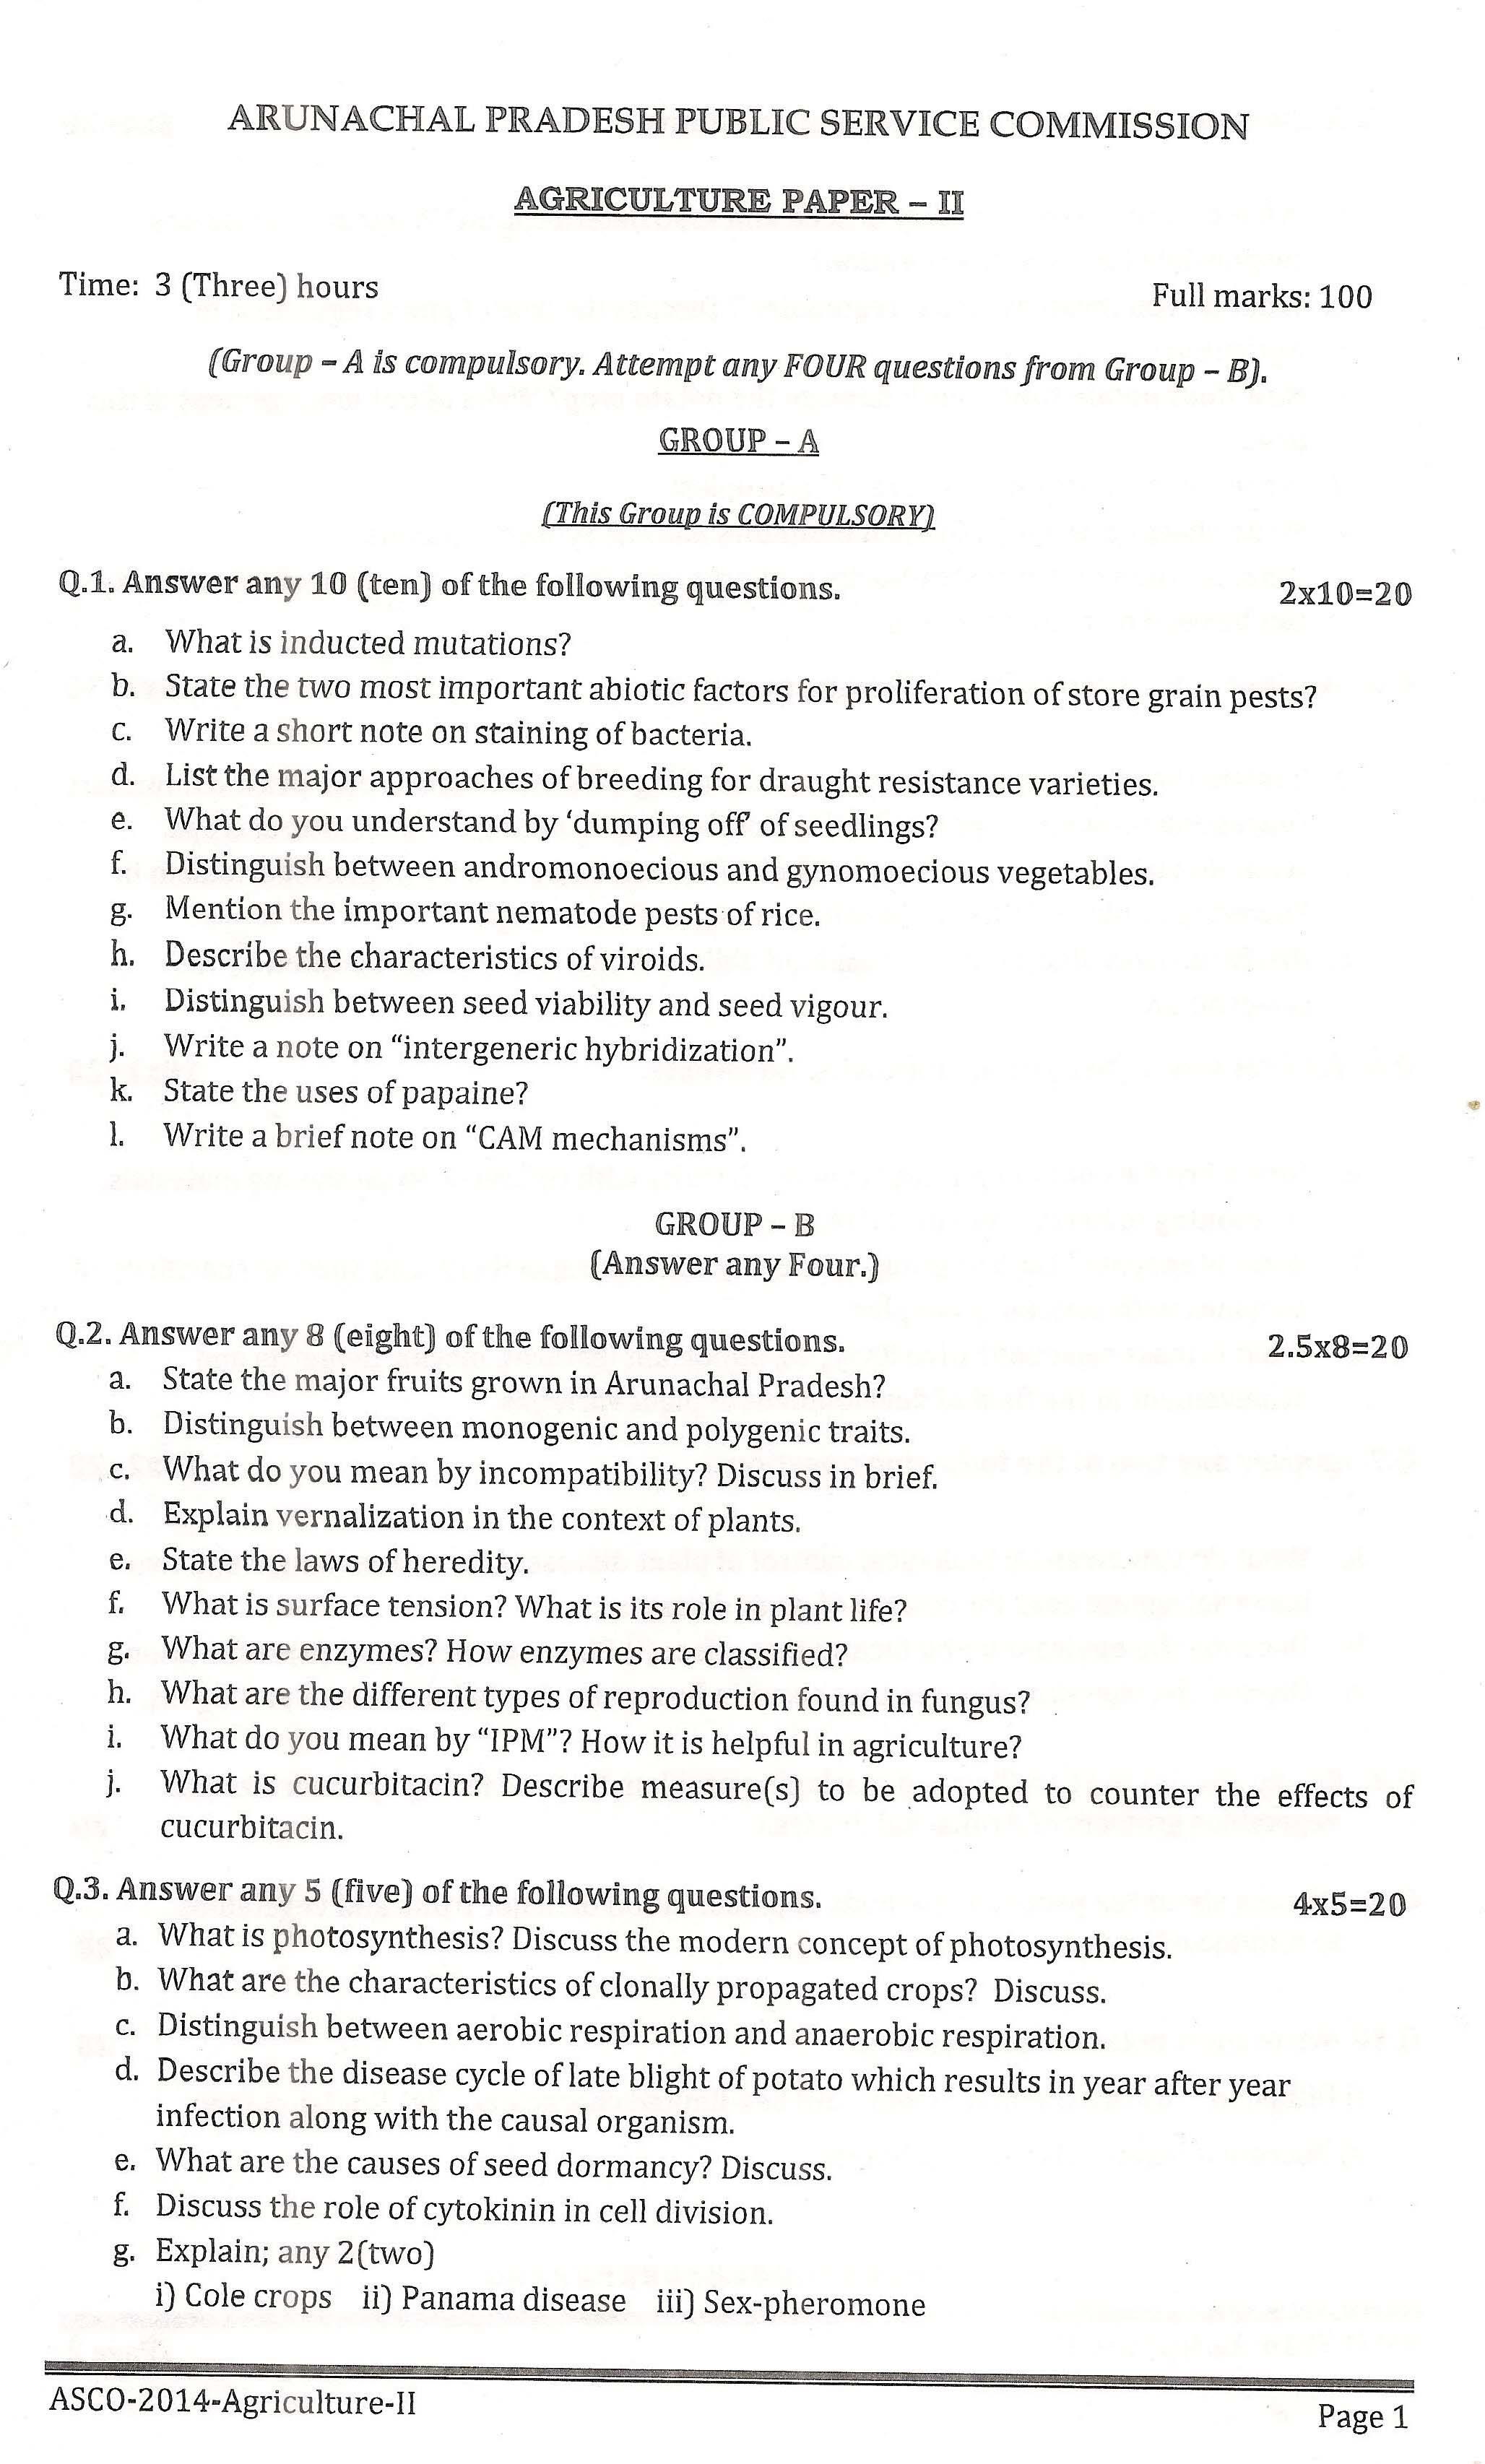 APPSC ASCO Agriculture Paper II Exam Question Paper 2014 1